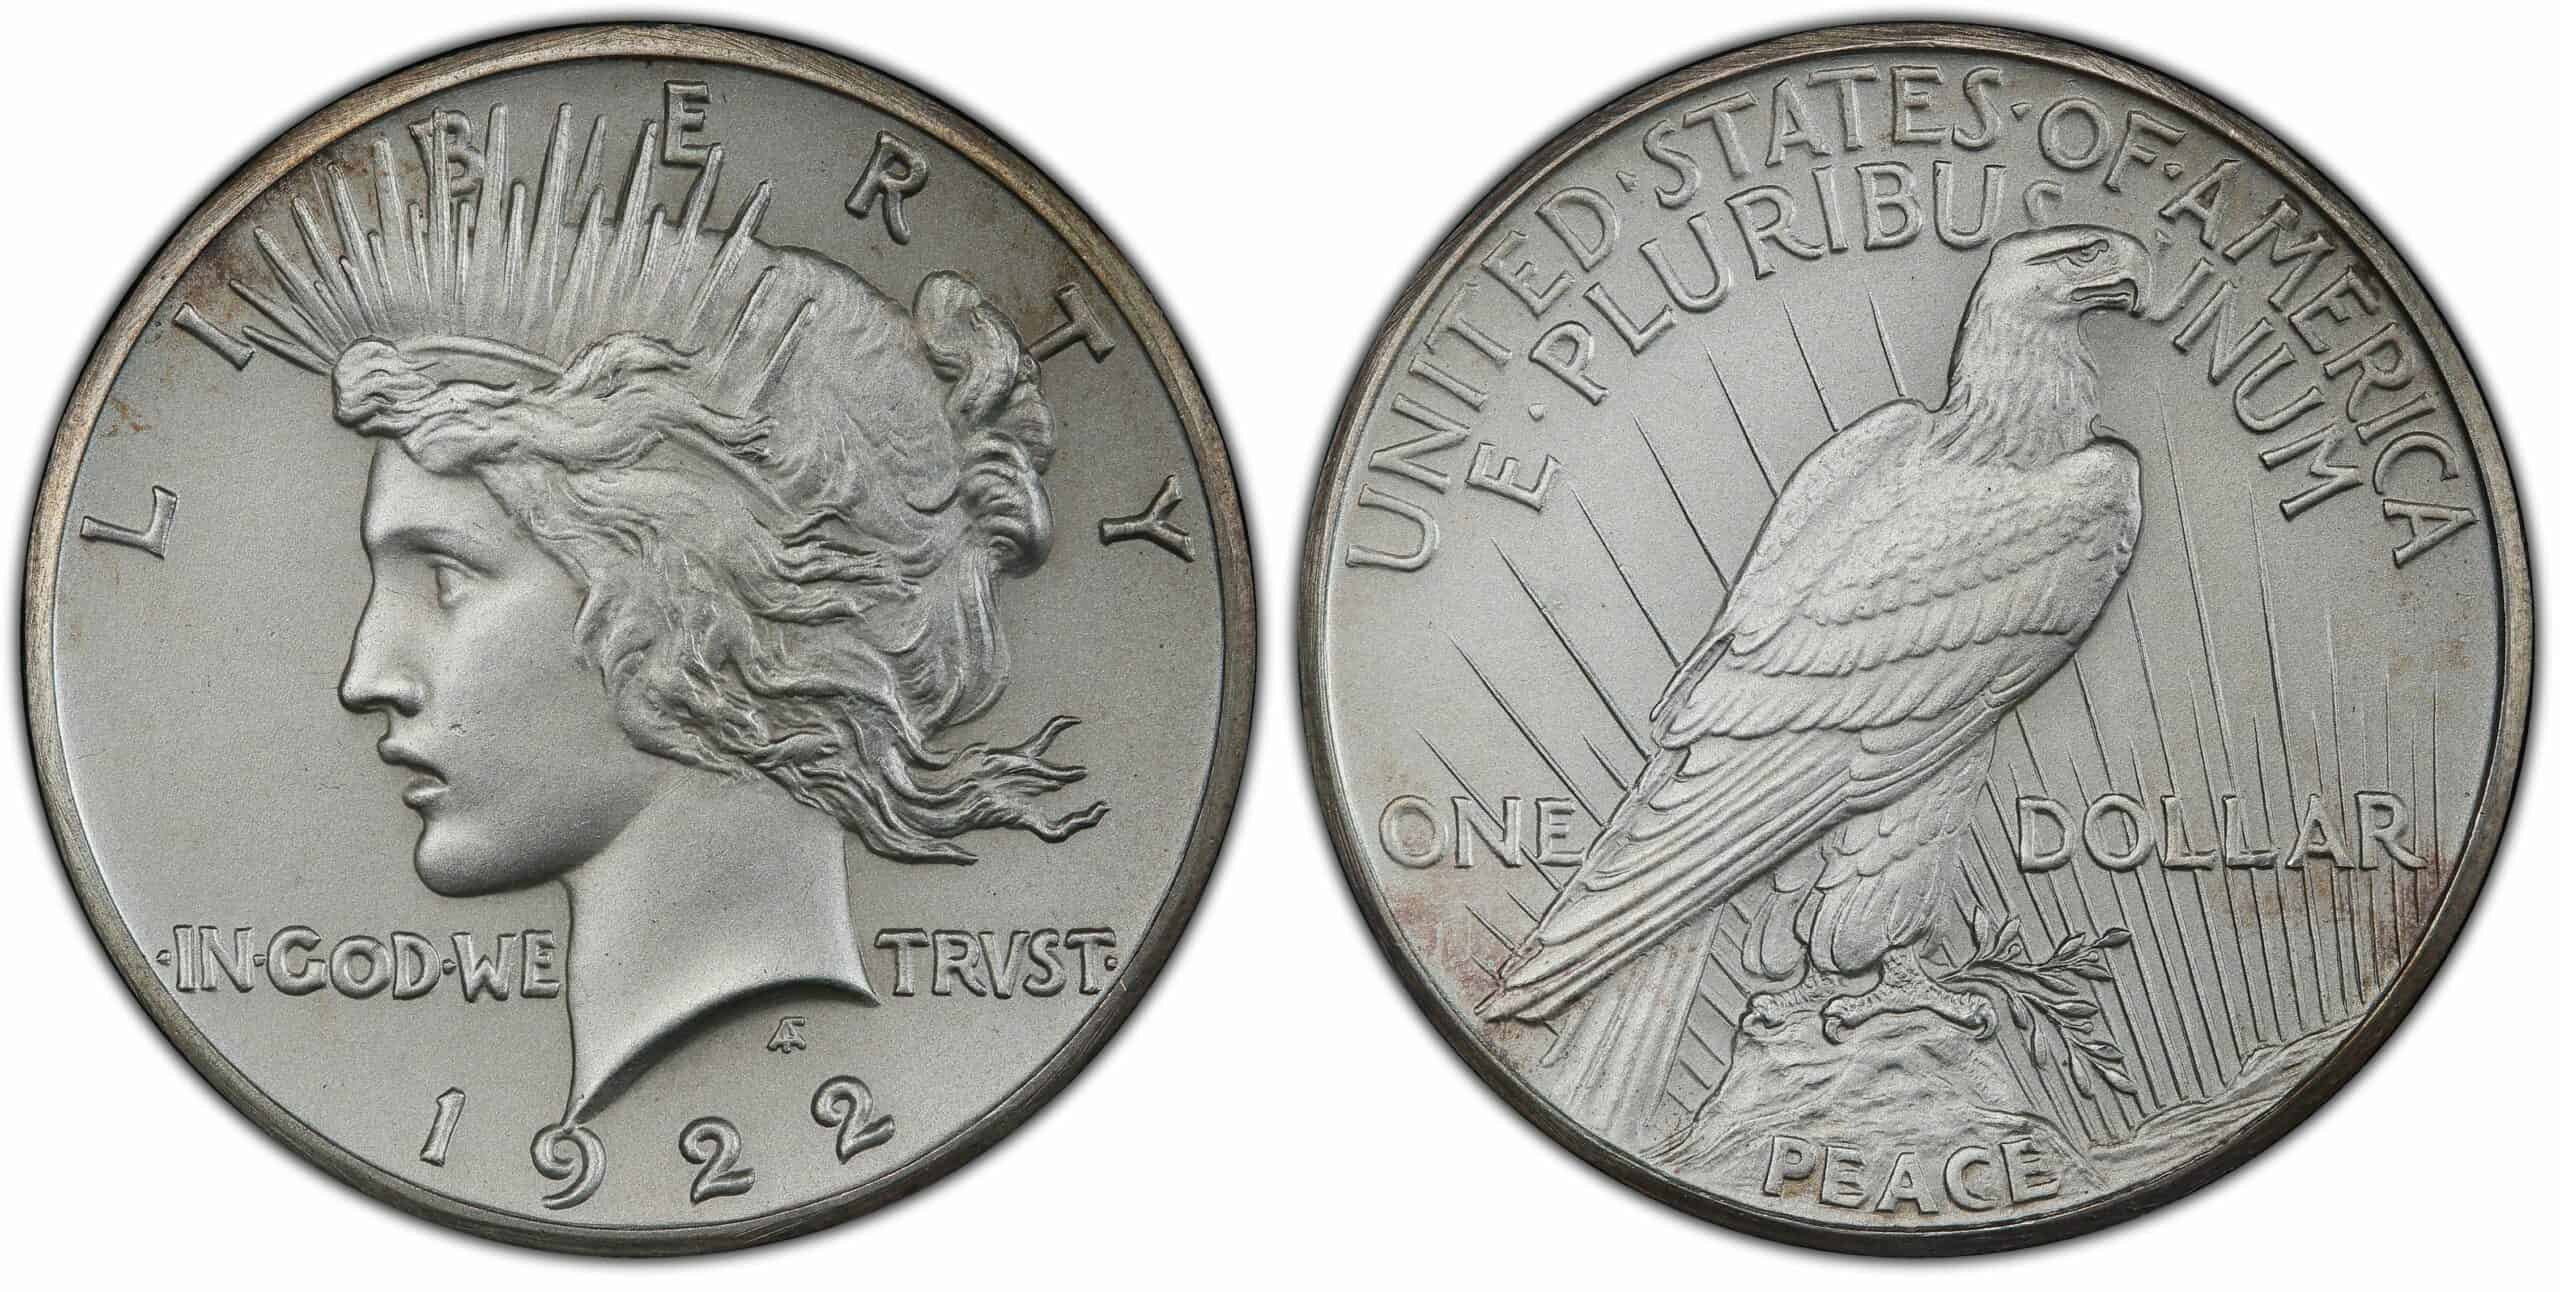 How to Grade the 1922 Silver Dollar